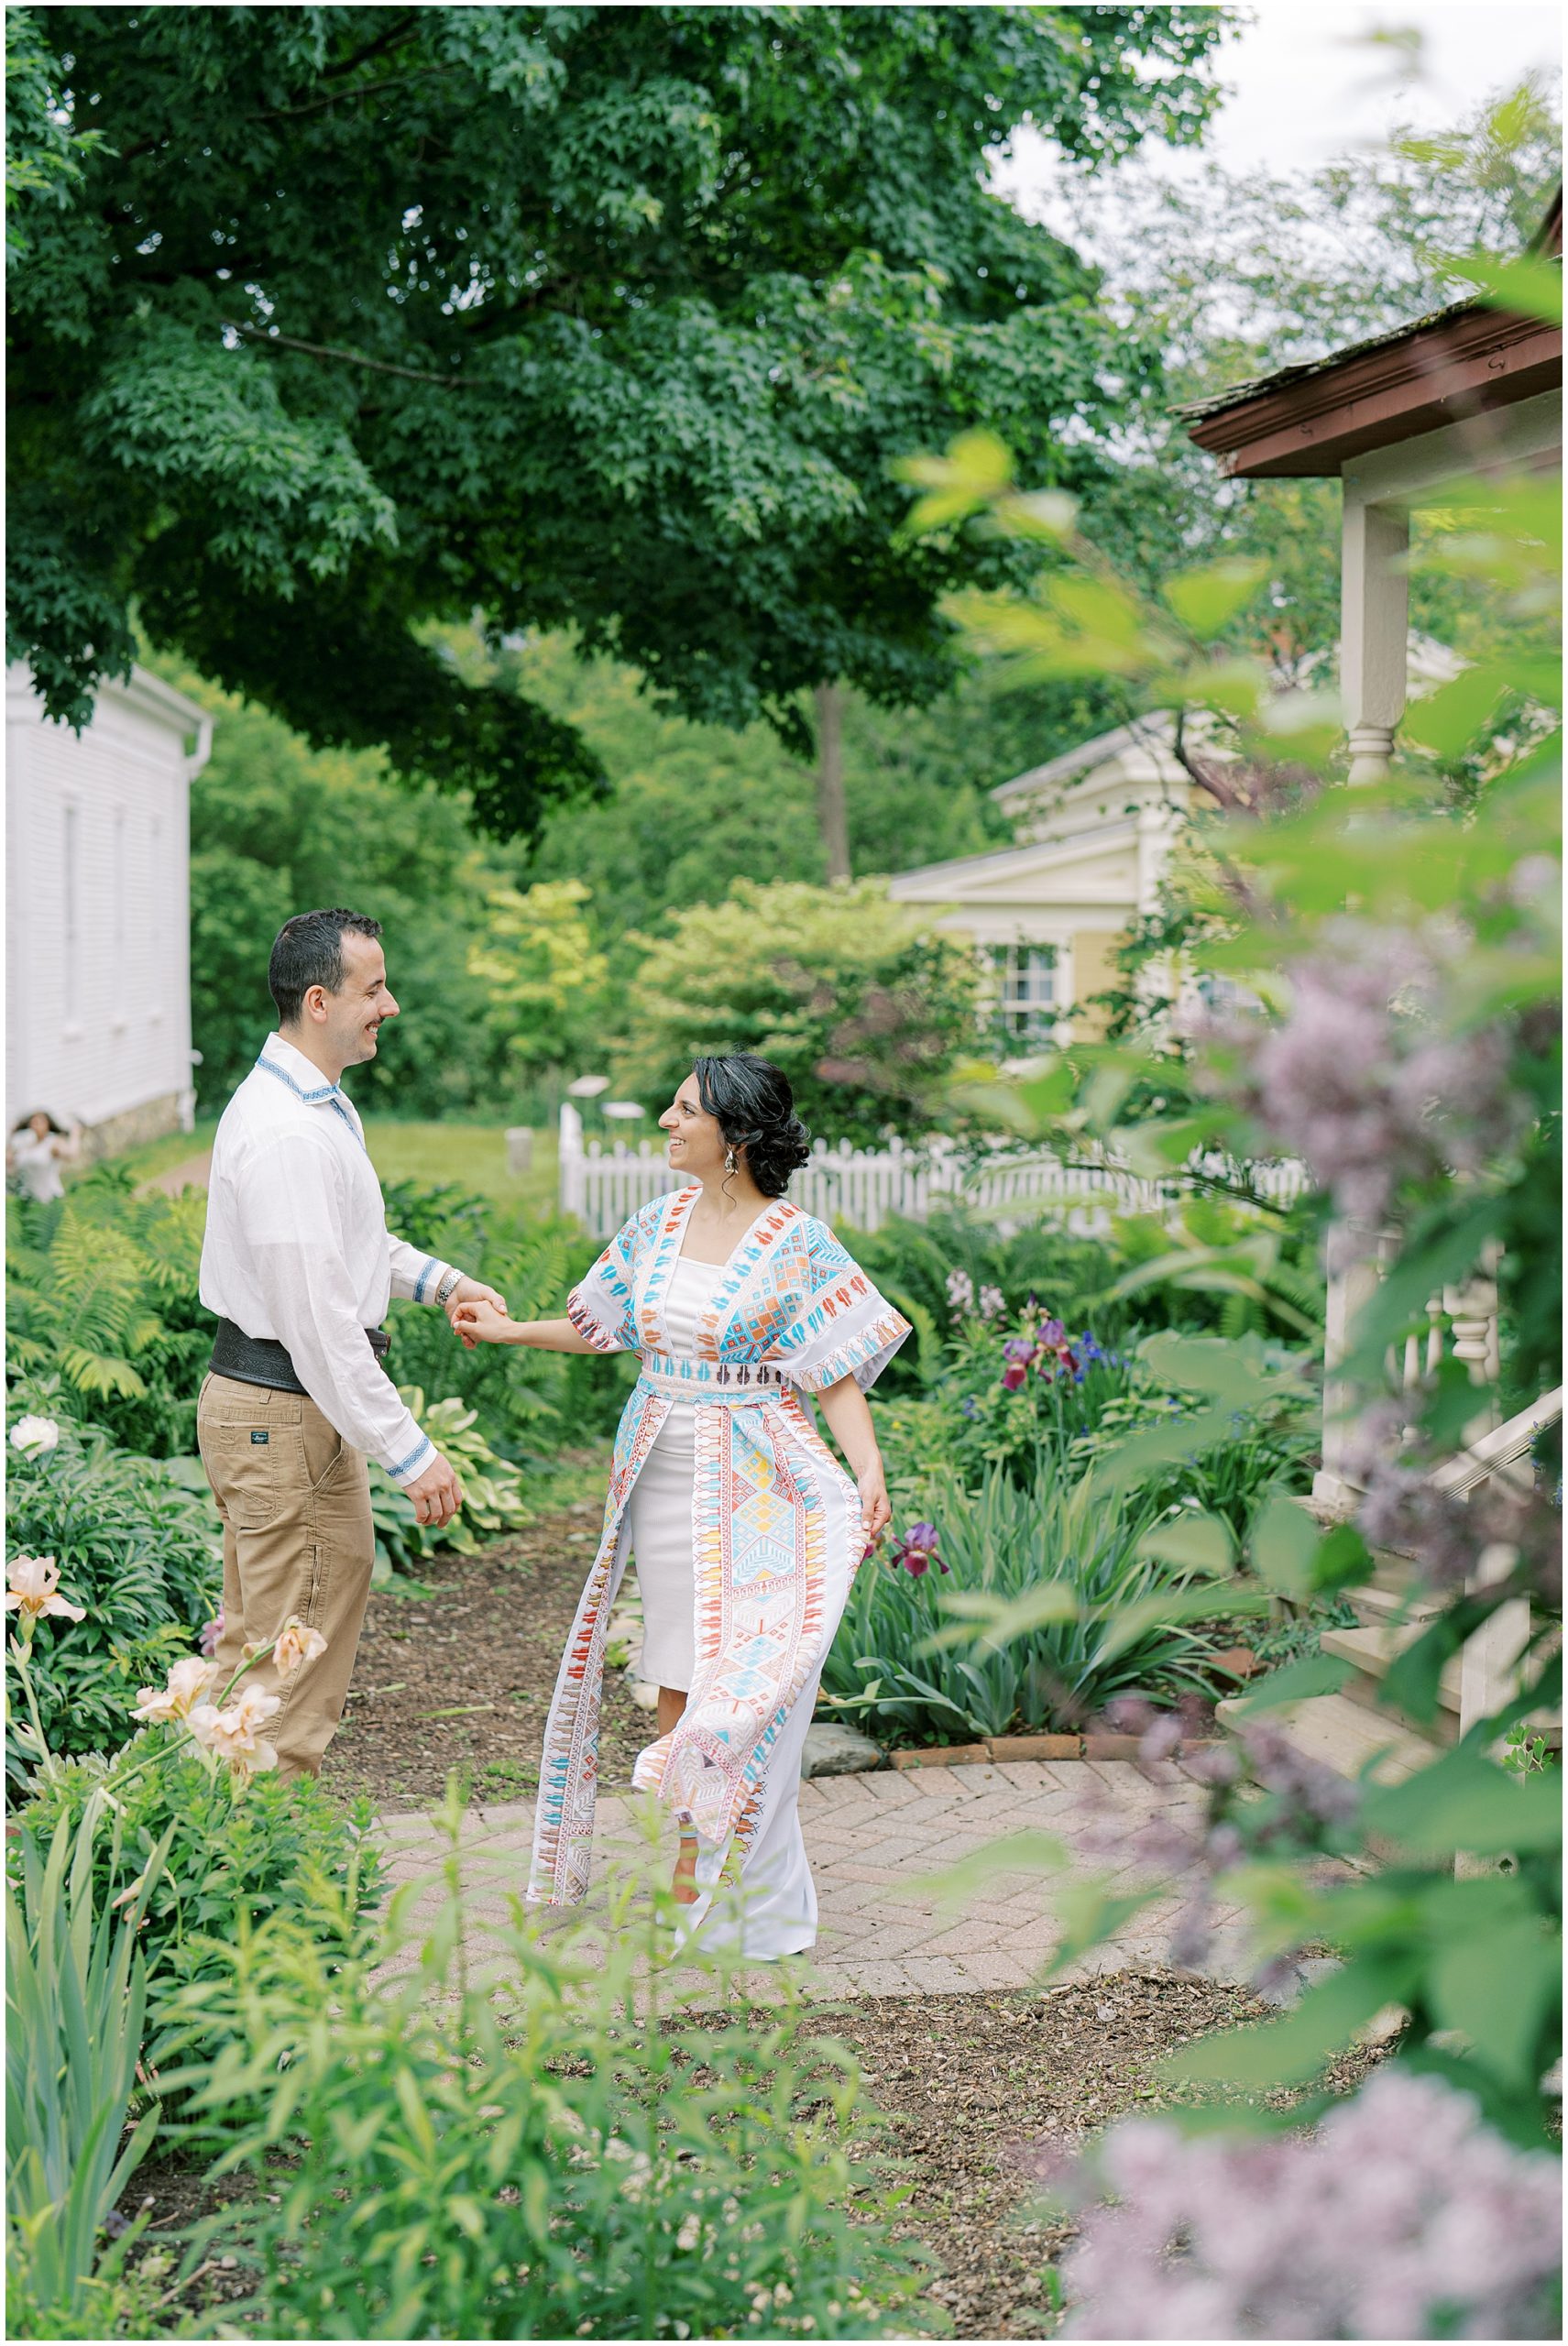 outdoor engagement photos in traditional outfits